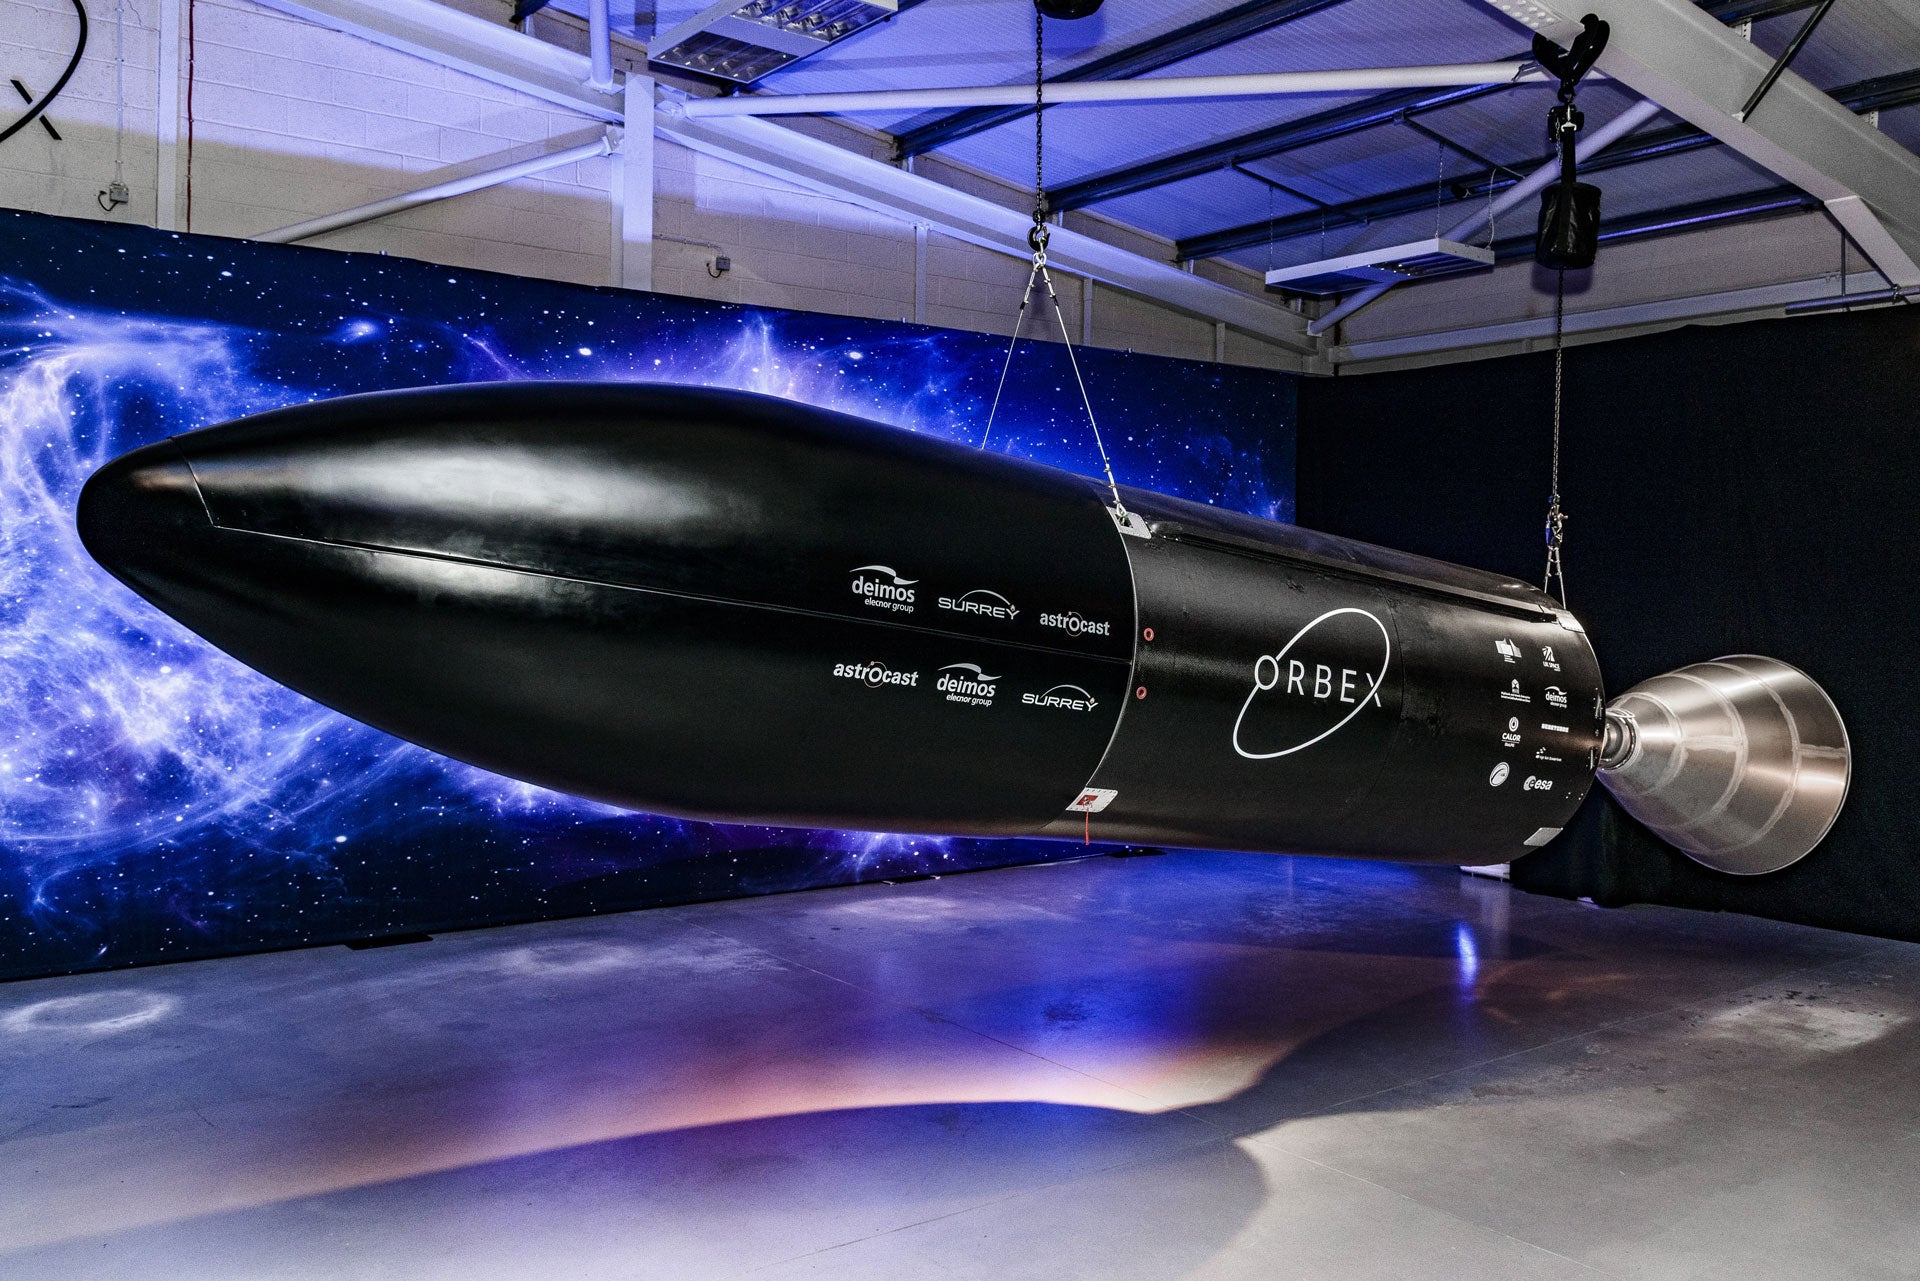 Is Orbex the European SpaceX?